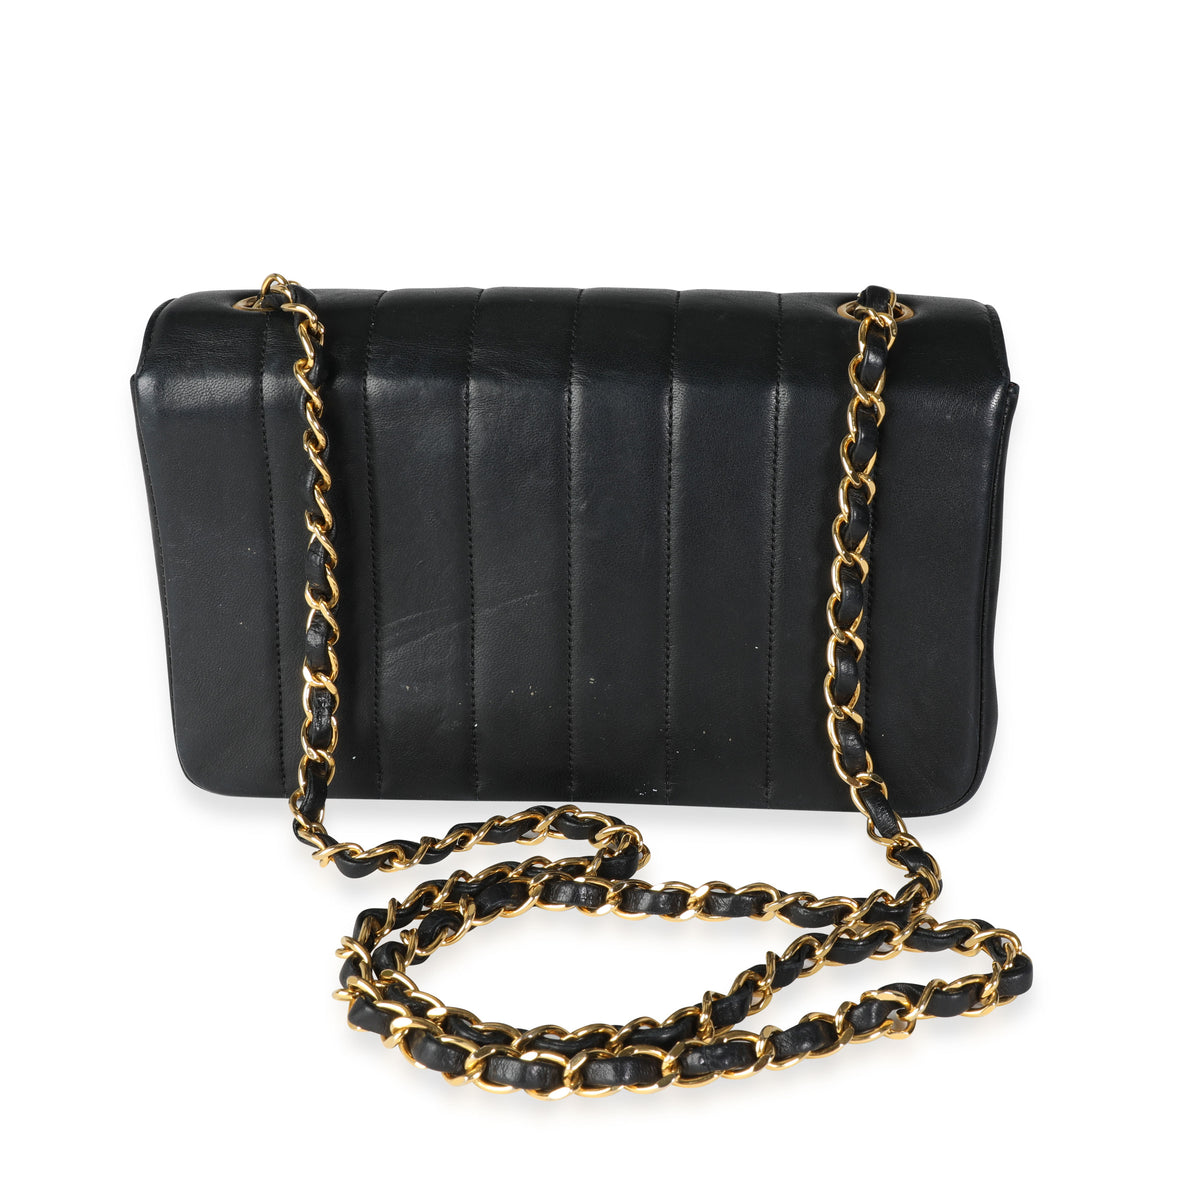 Chanel Vintage Black Chevron Quilted Leather Crossbody Bag